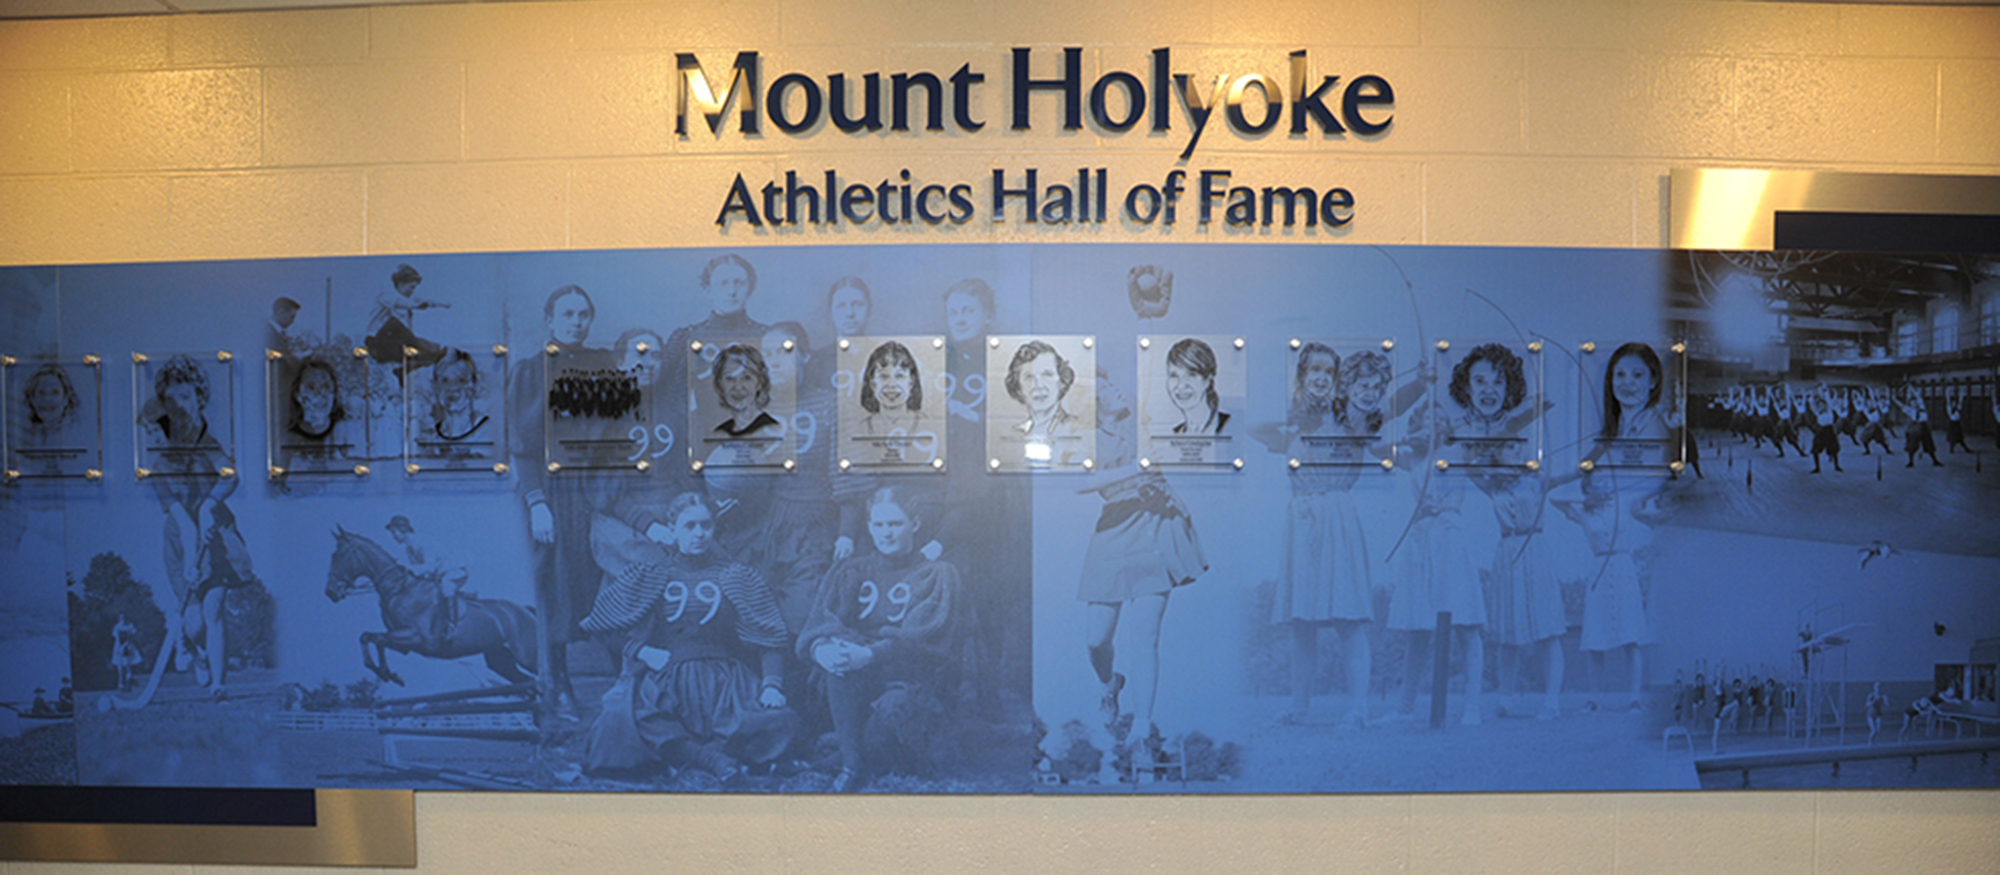 Image of the Mount Holyoke Athletics Hall of Fame Wall within the Kendall Sports & Dance Complex.